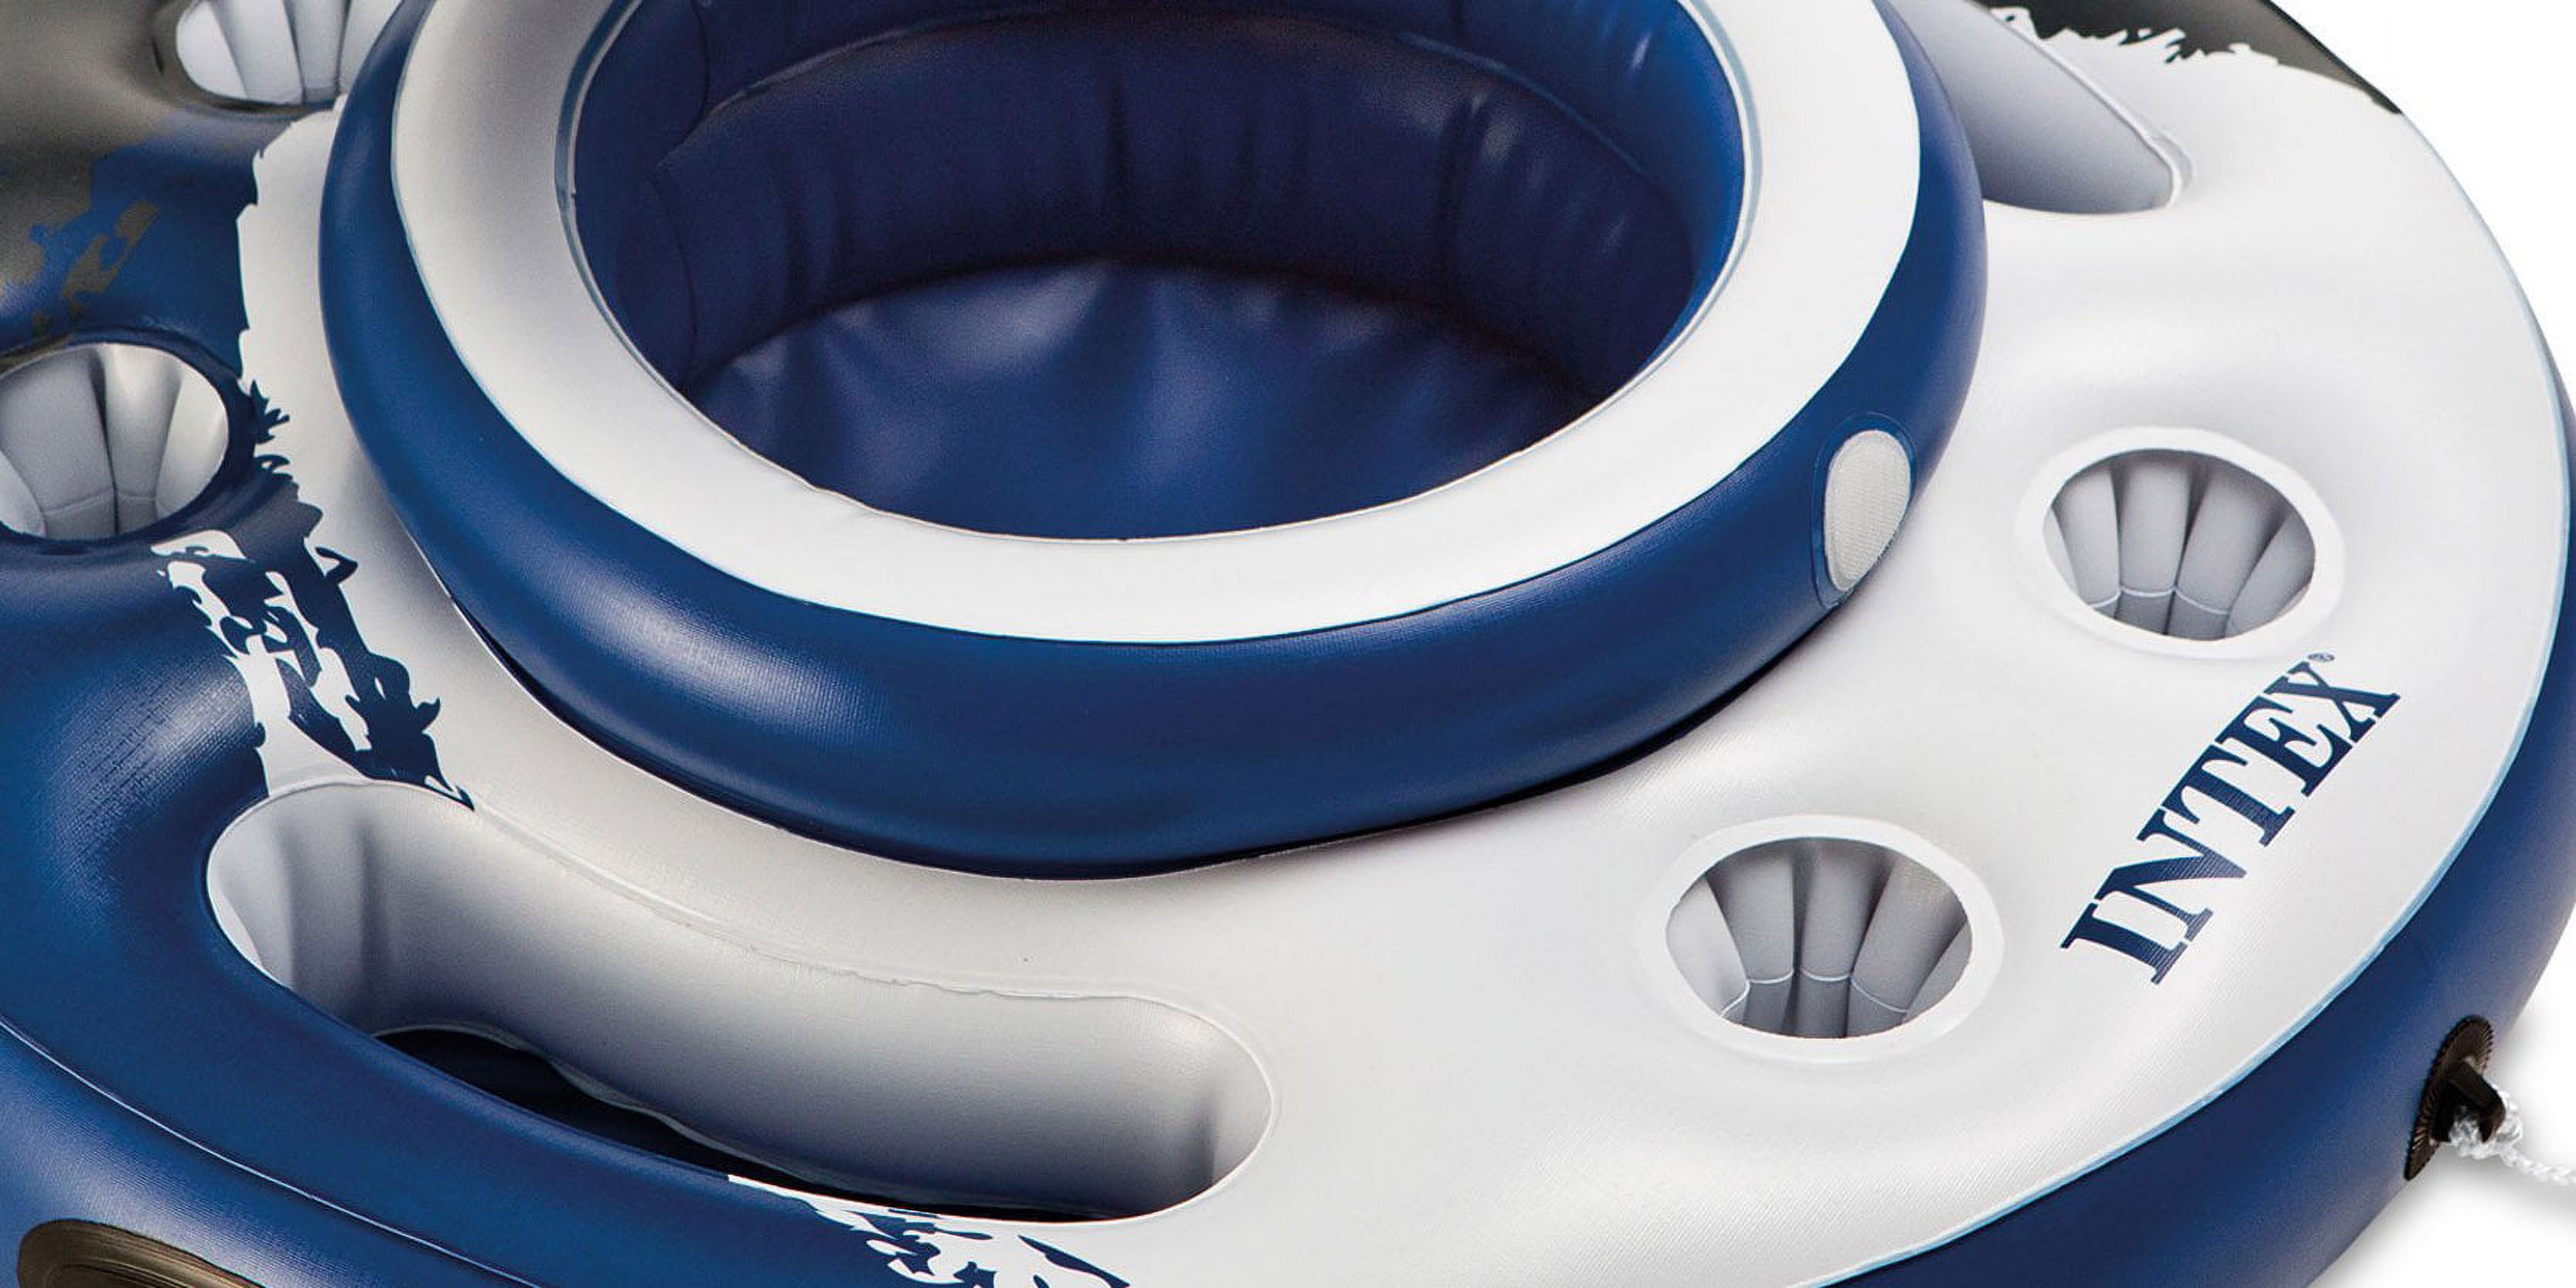 Intex Mega Chill Inflatable Float For Water Use - image 4 of 6